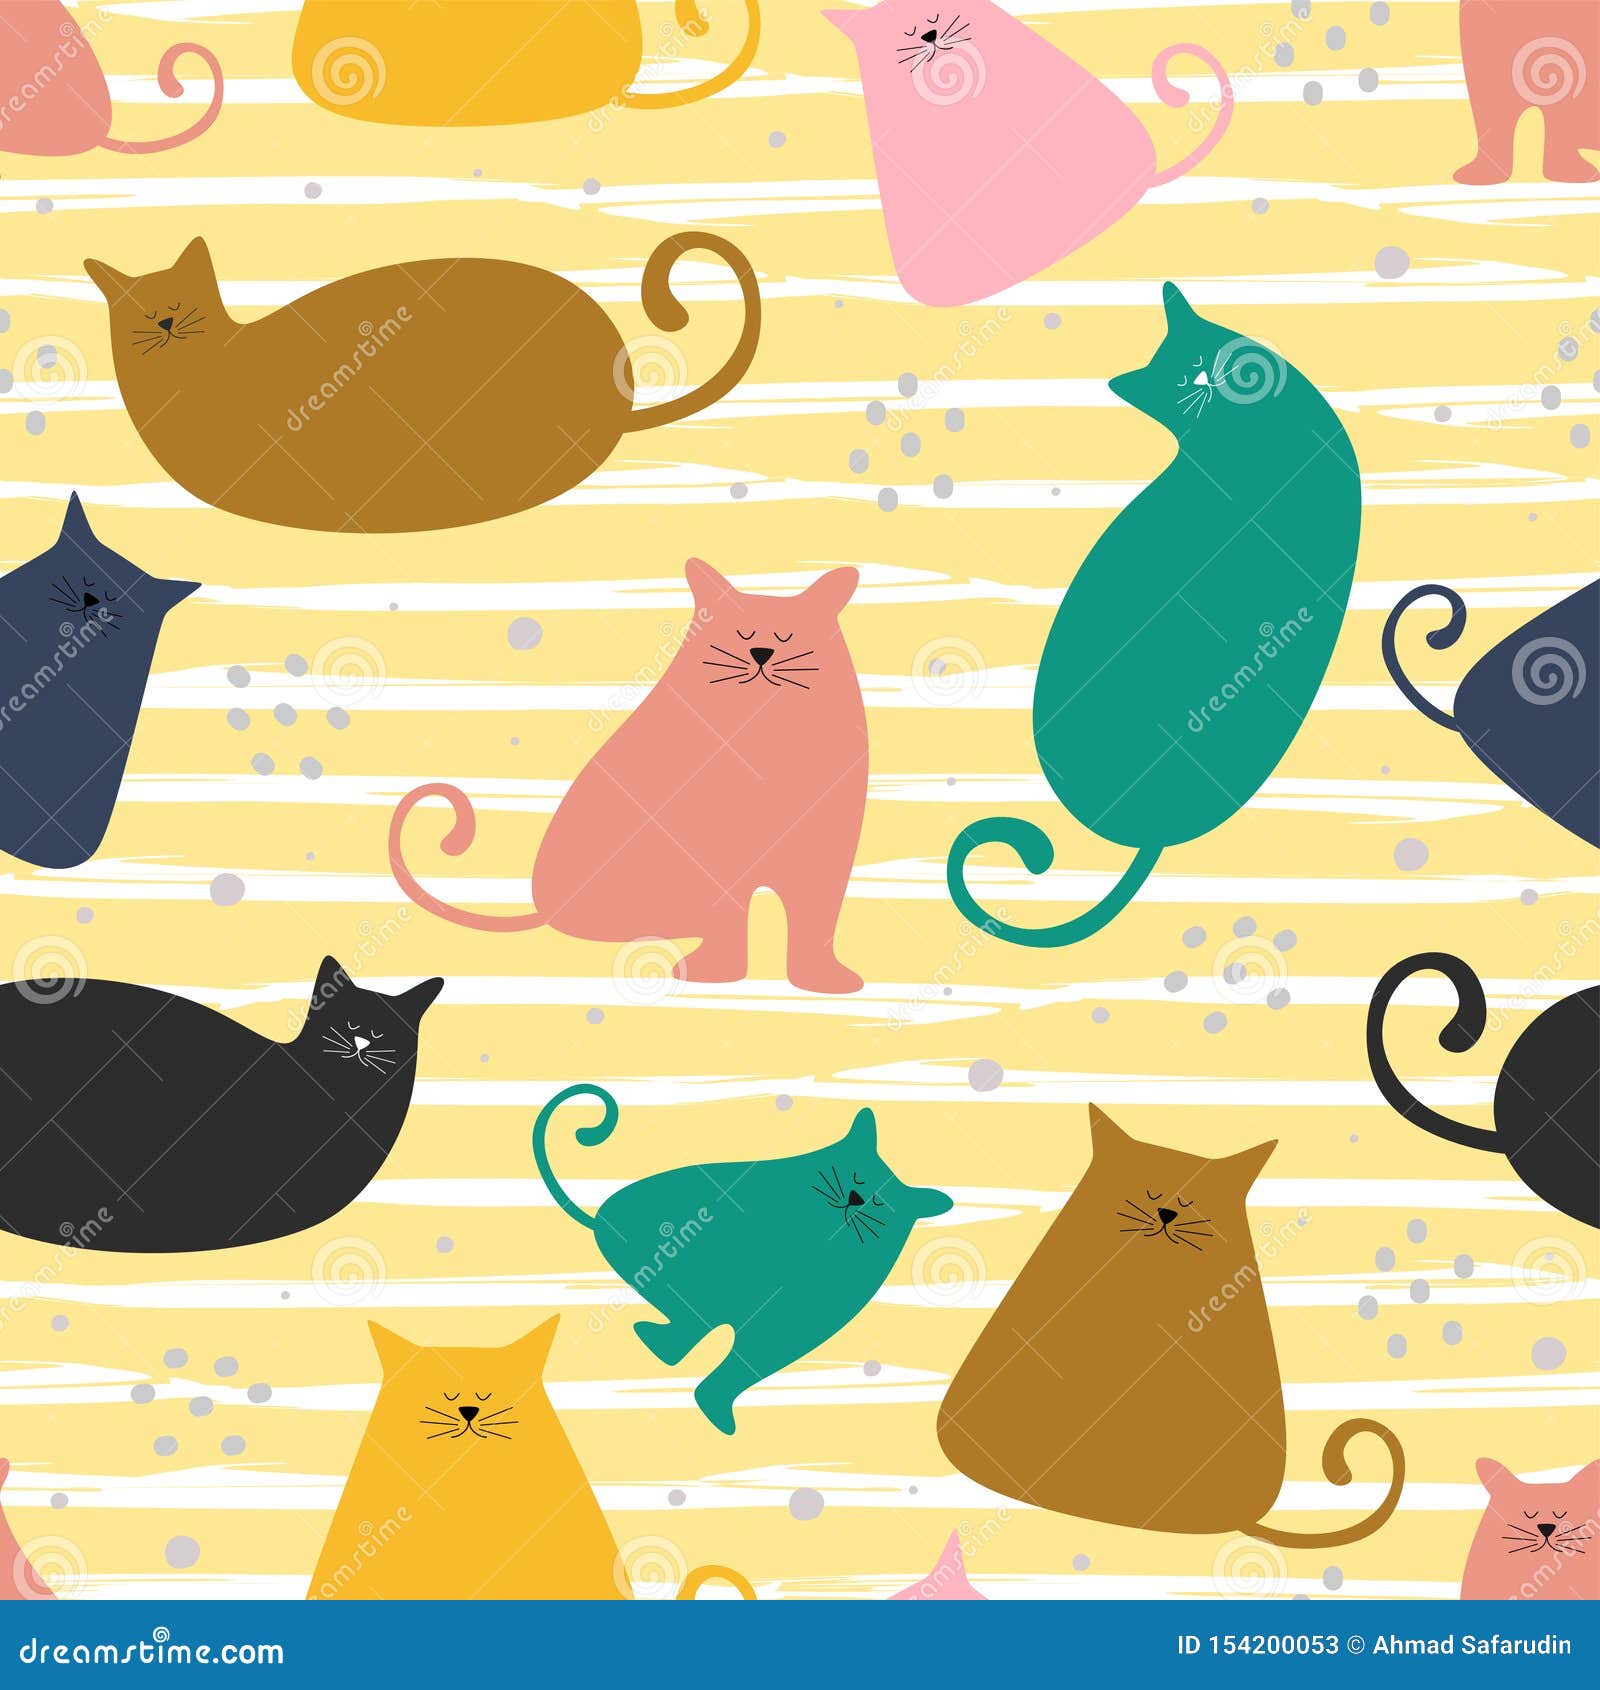 funny cat seamless pattern colorful decoration. childish graphic cover for  kid birthday card, party wallpaper, holiday